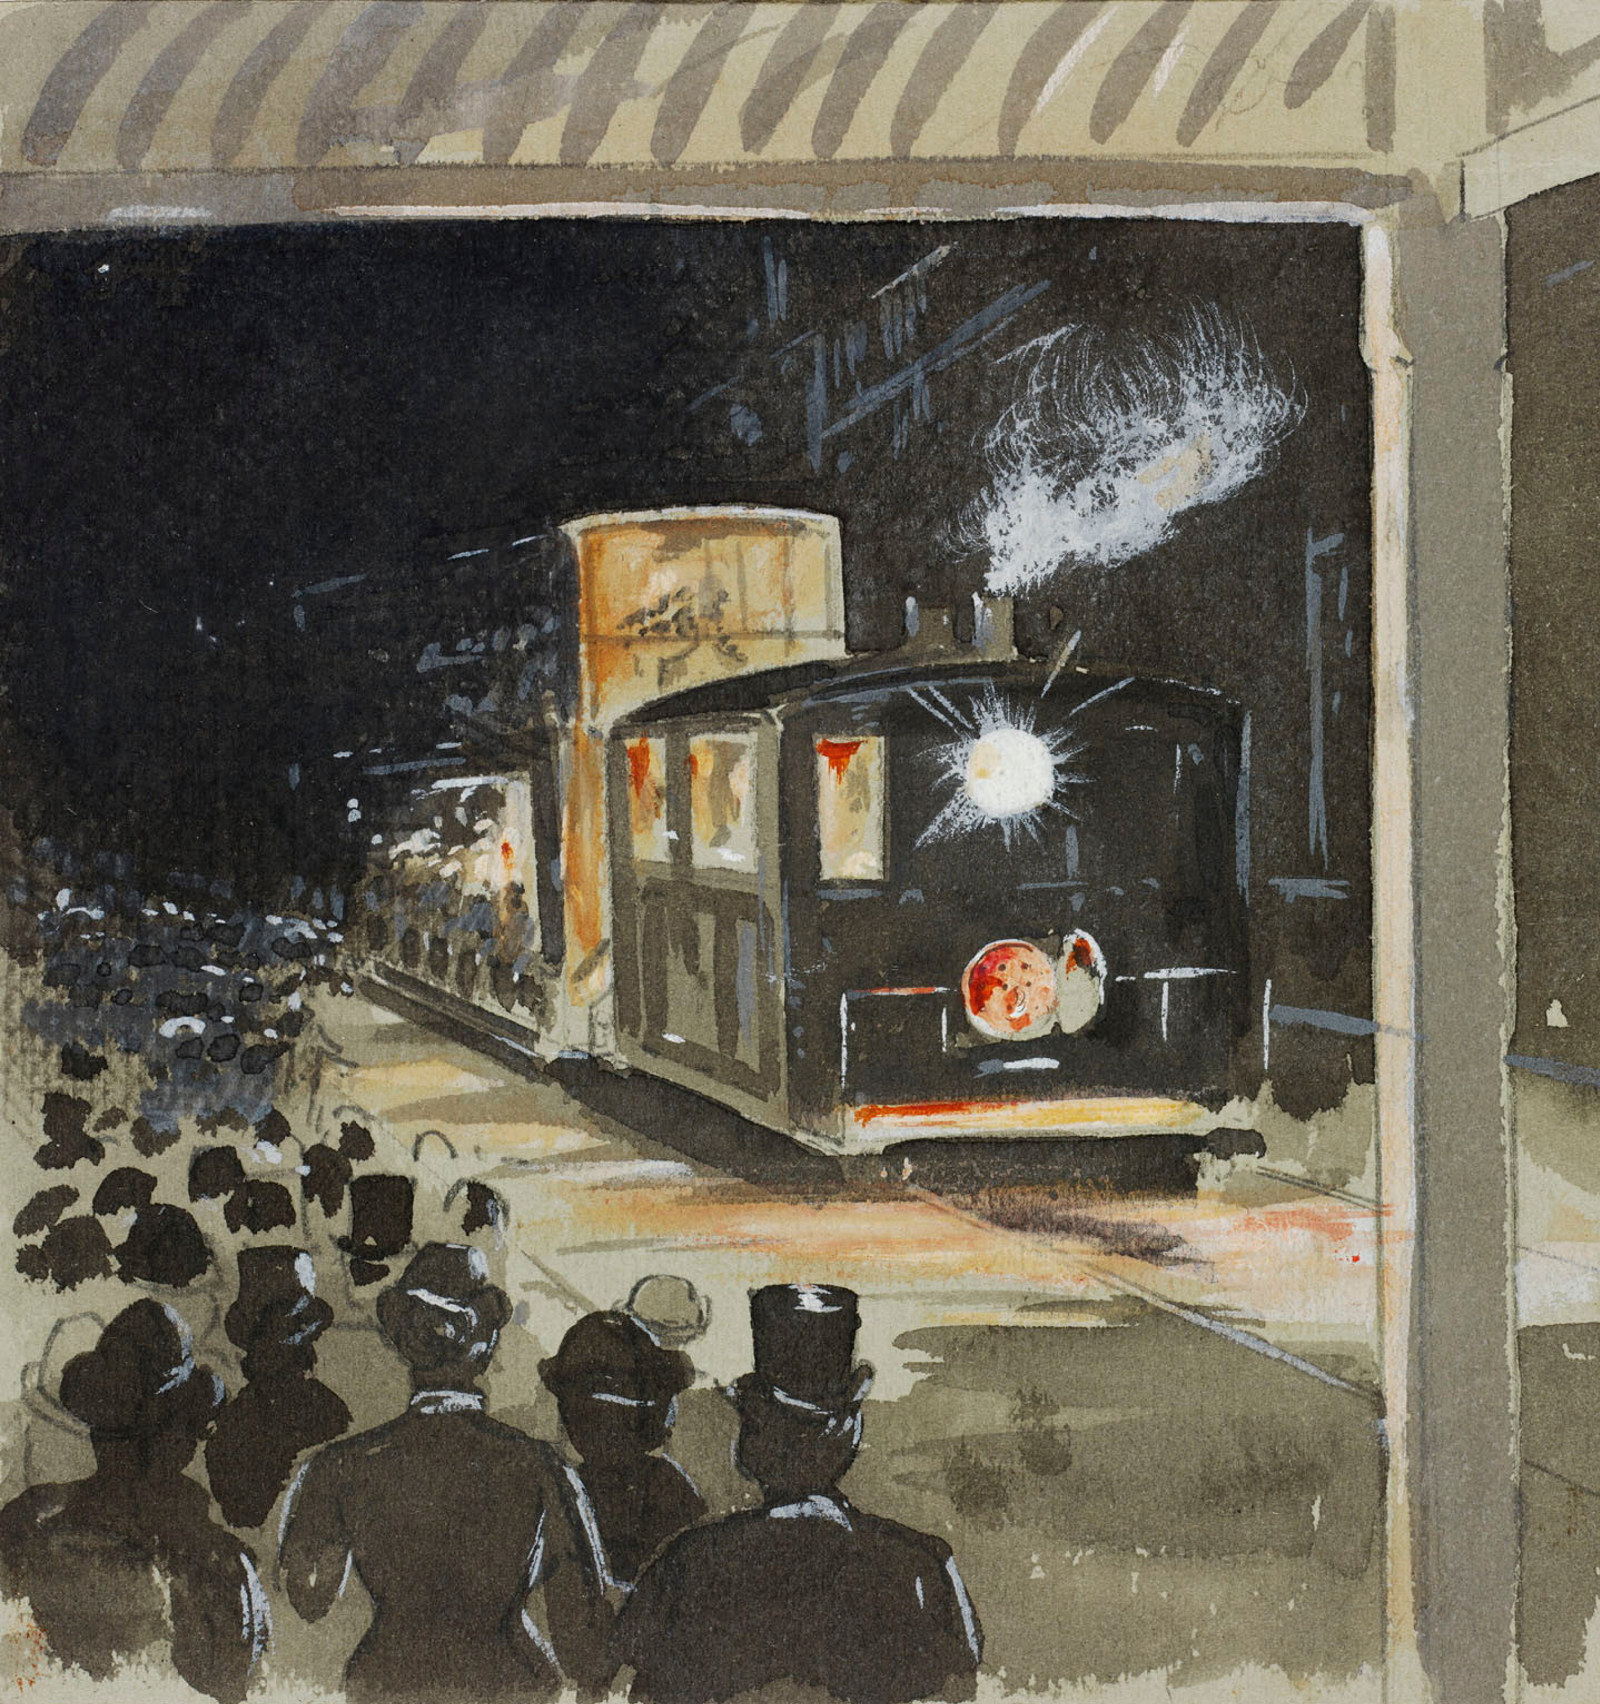 Illustration of a steam tram light up at night passing along a street crowded with onlookers on the footpaths.